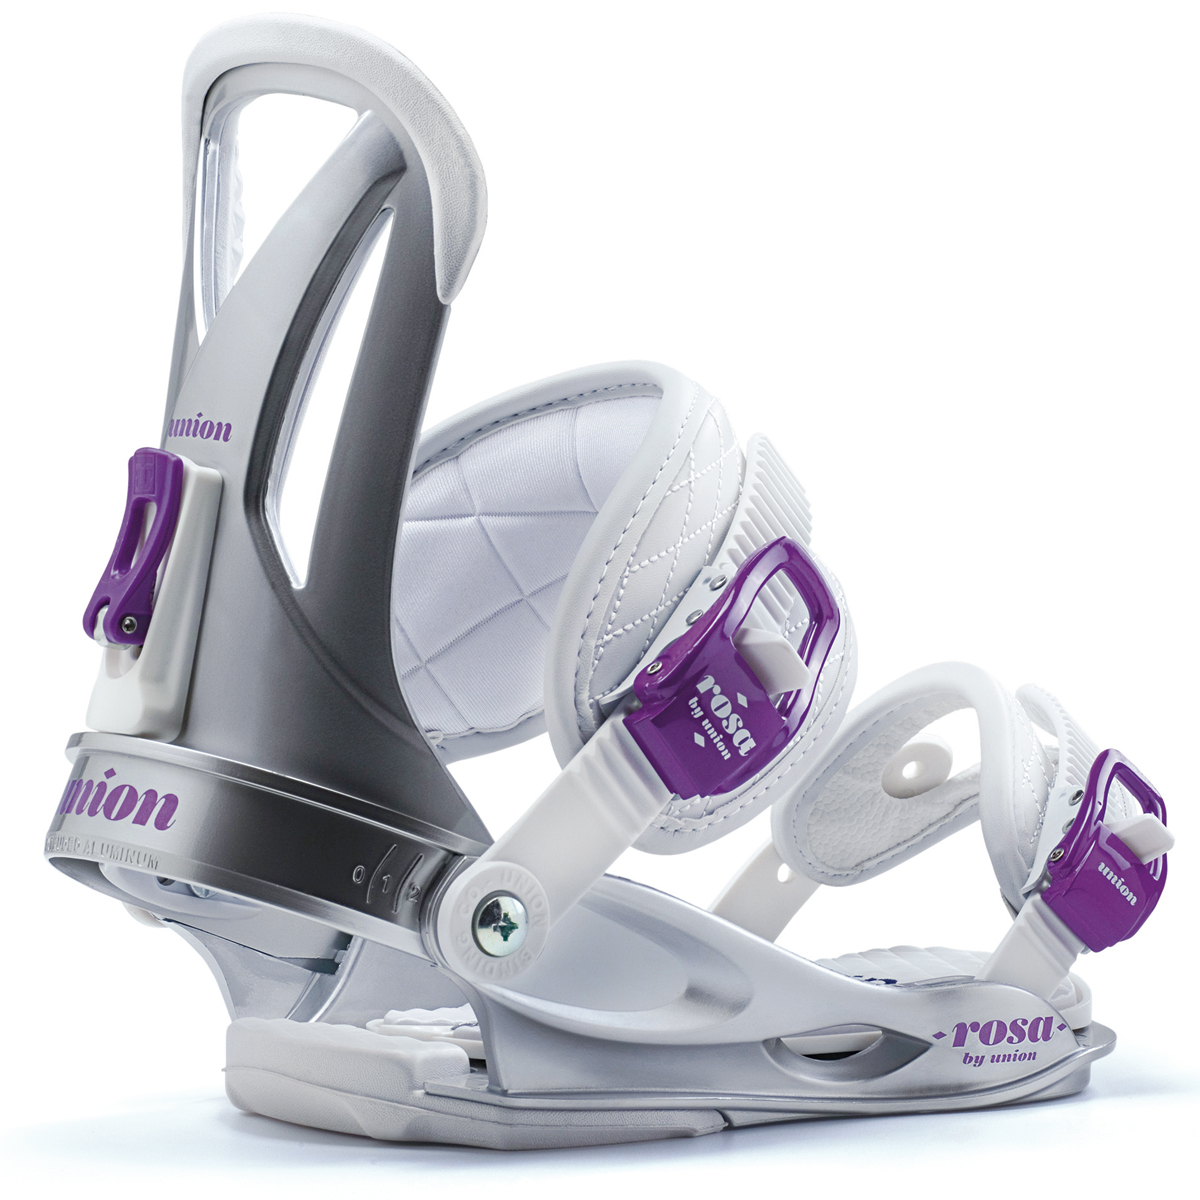 UNION BINDINGS are in! — Jamestown Skate Products